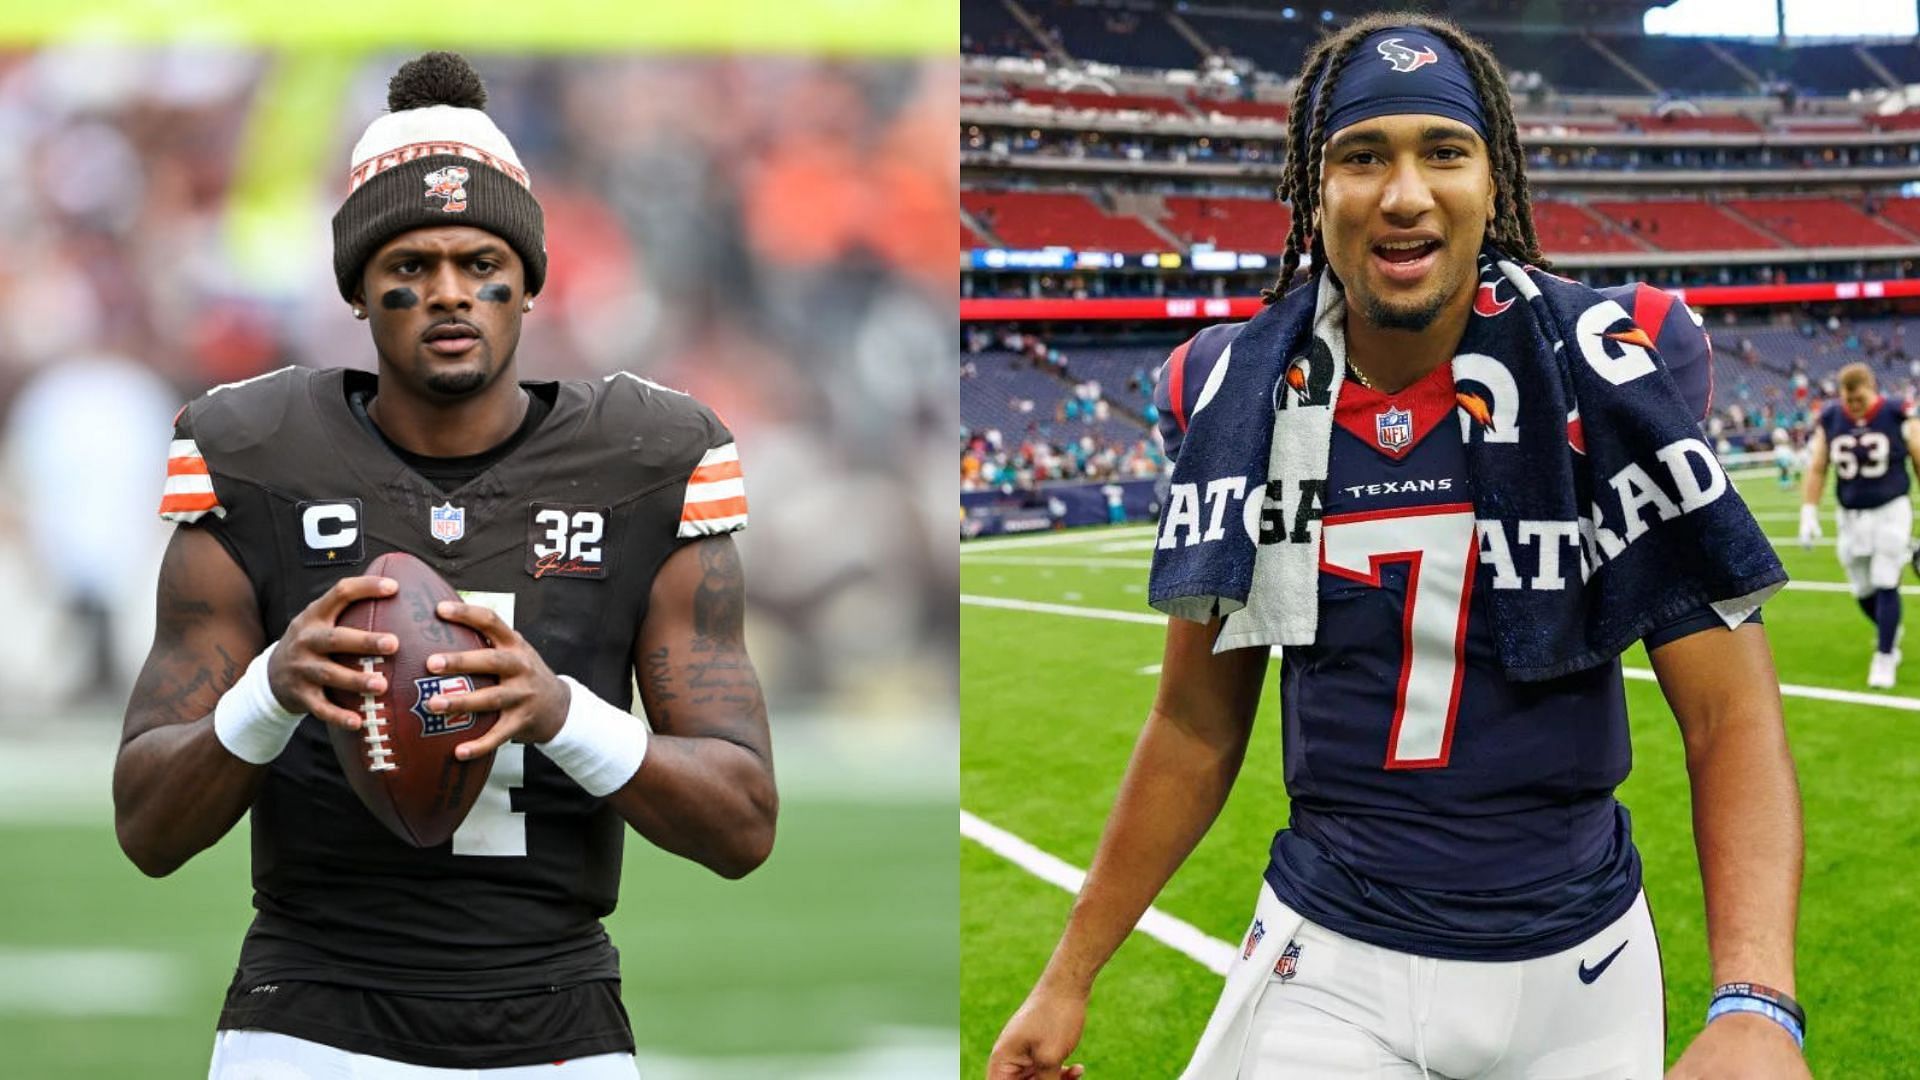 &ldquo;Business is business&rdquo;: Deshaun Watson gets candid on CJ Stroud after rookie QB replaced $230,000,000 star with Texans